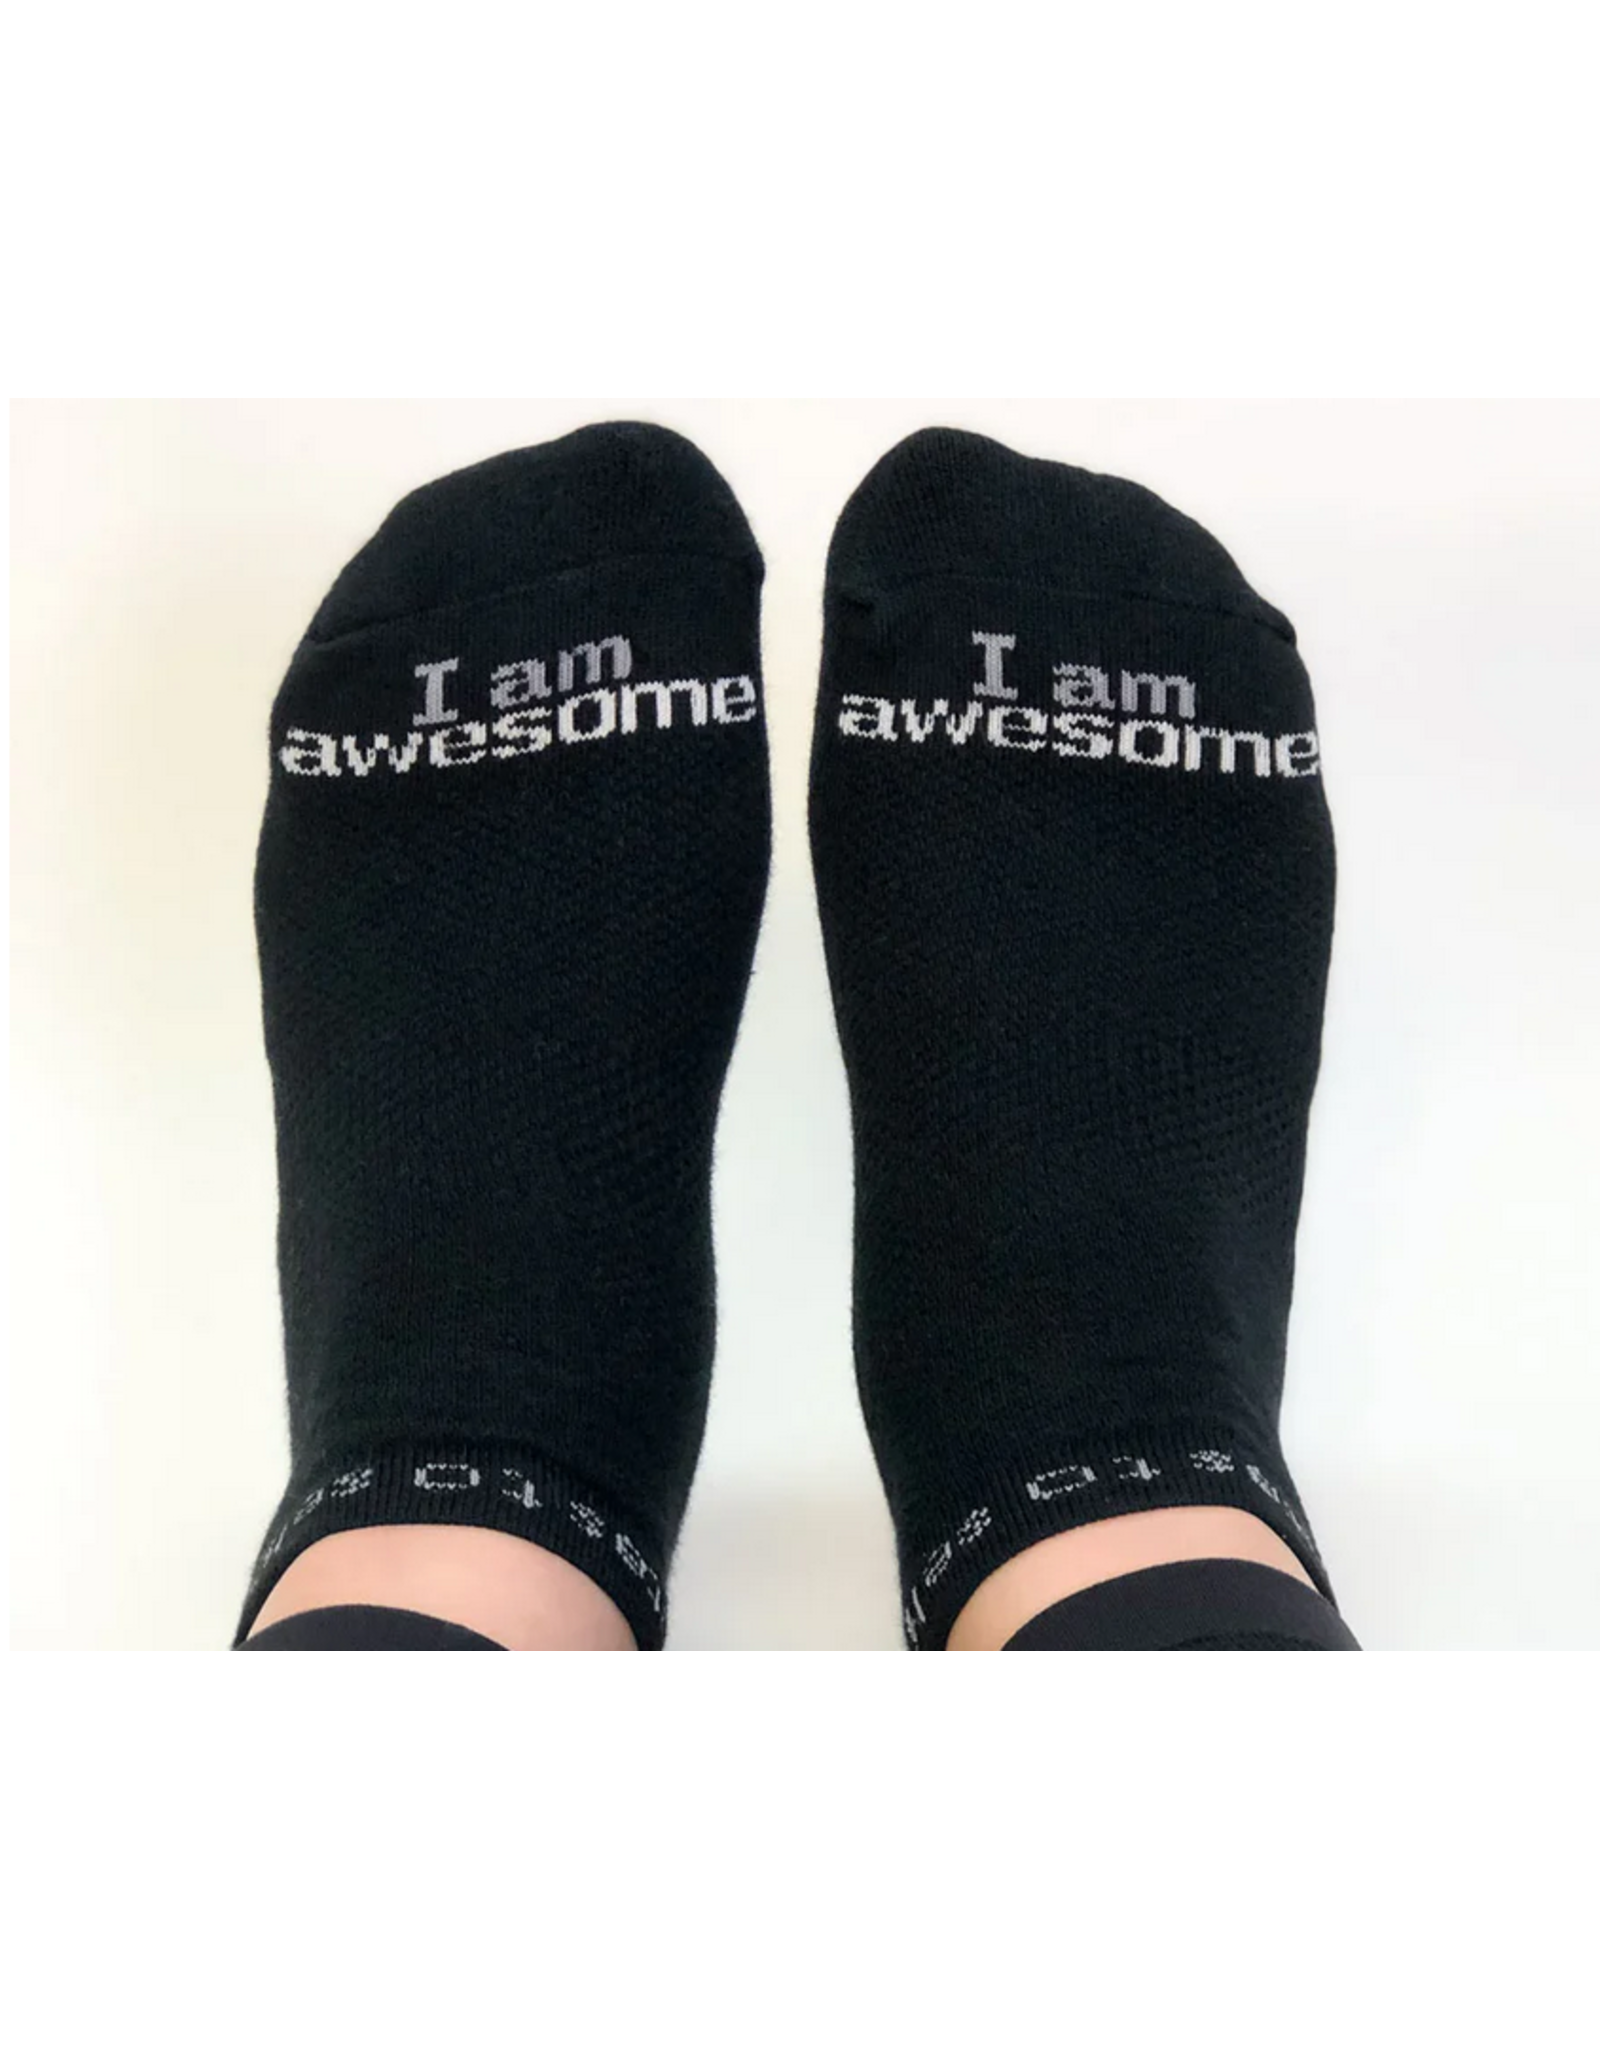 notes to self Notes to Self AWESOME 'I am awesome' Low-Cut Socks